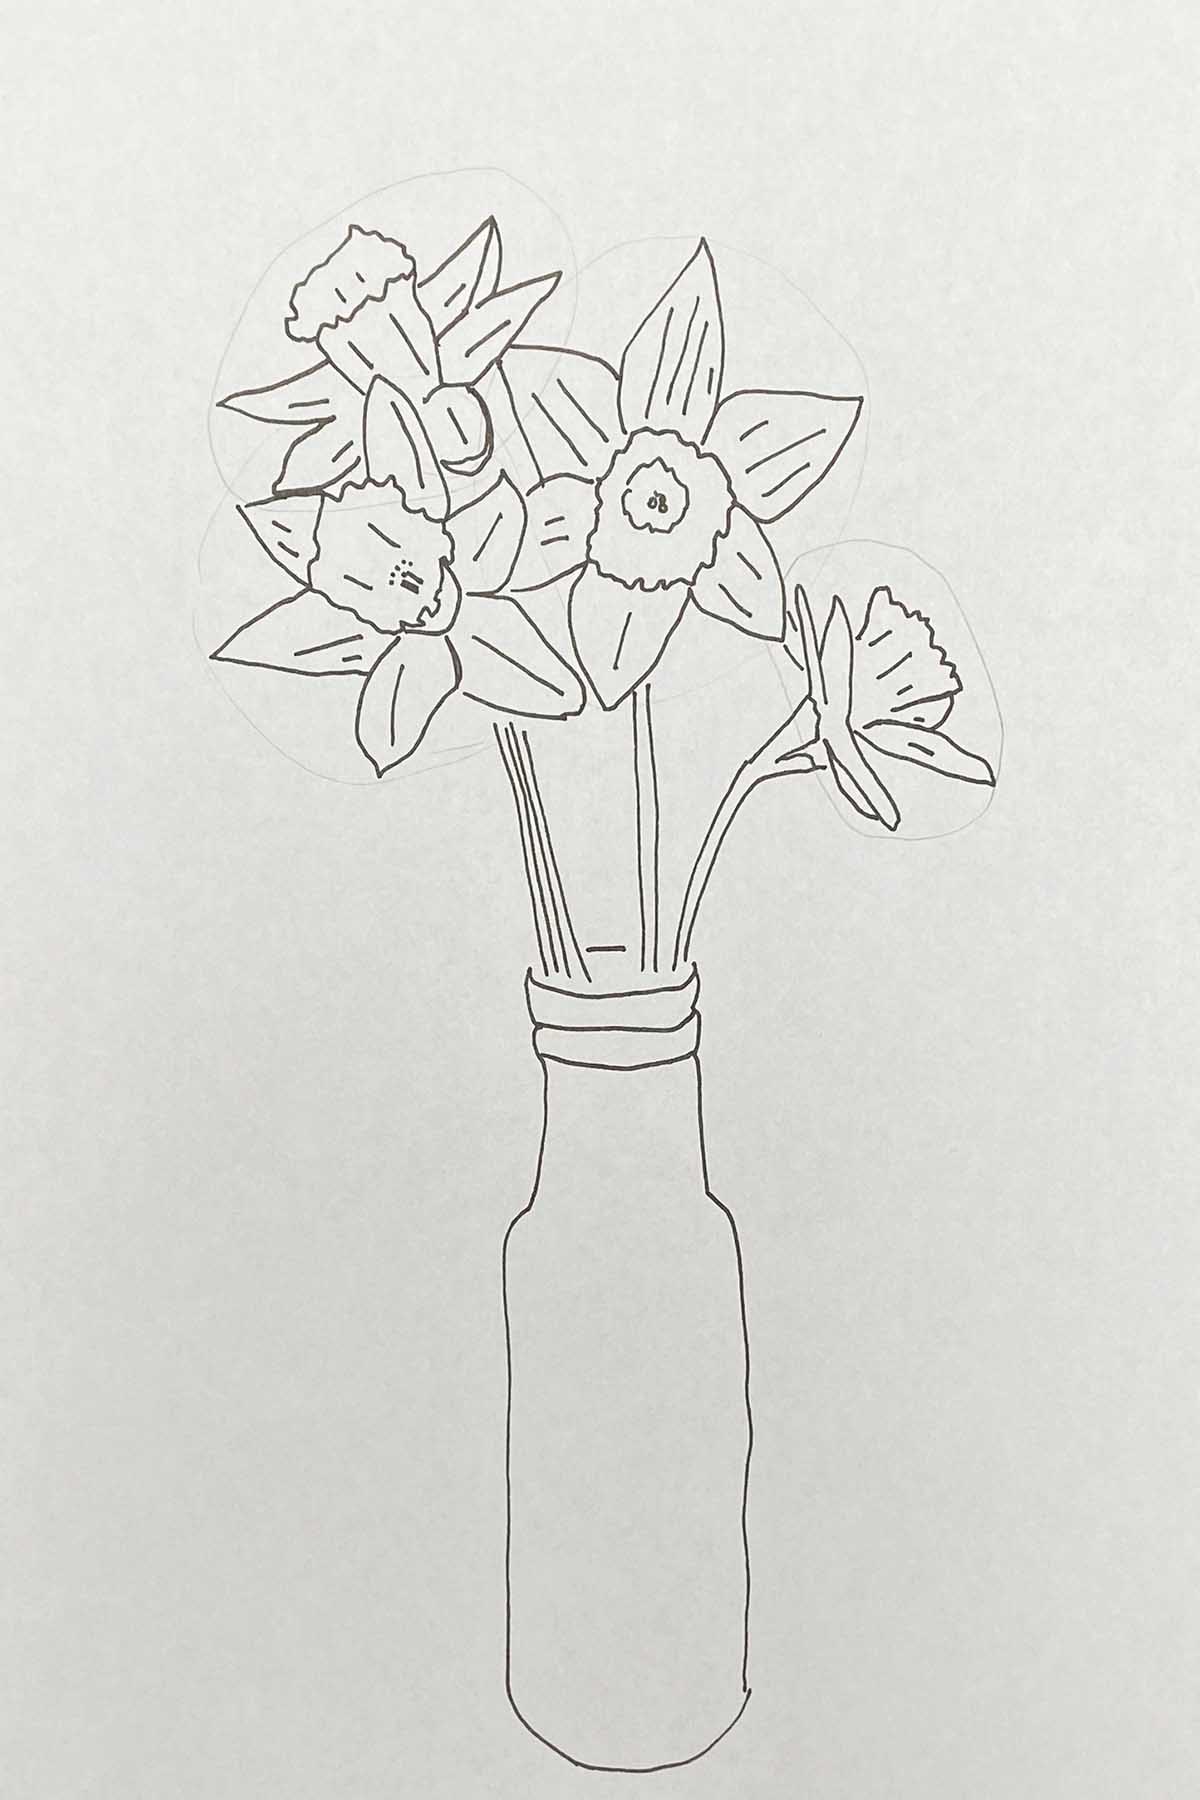 How to draw a bunch of daffodils in a vase adding the details